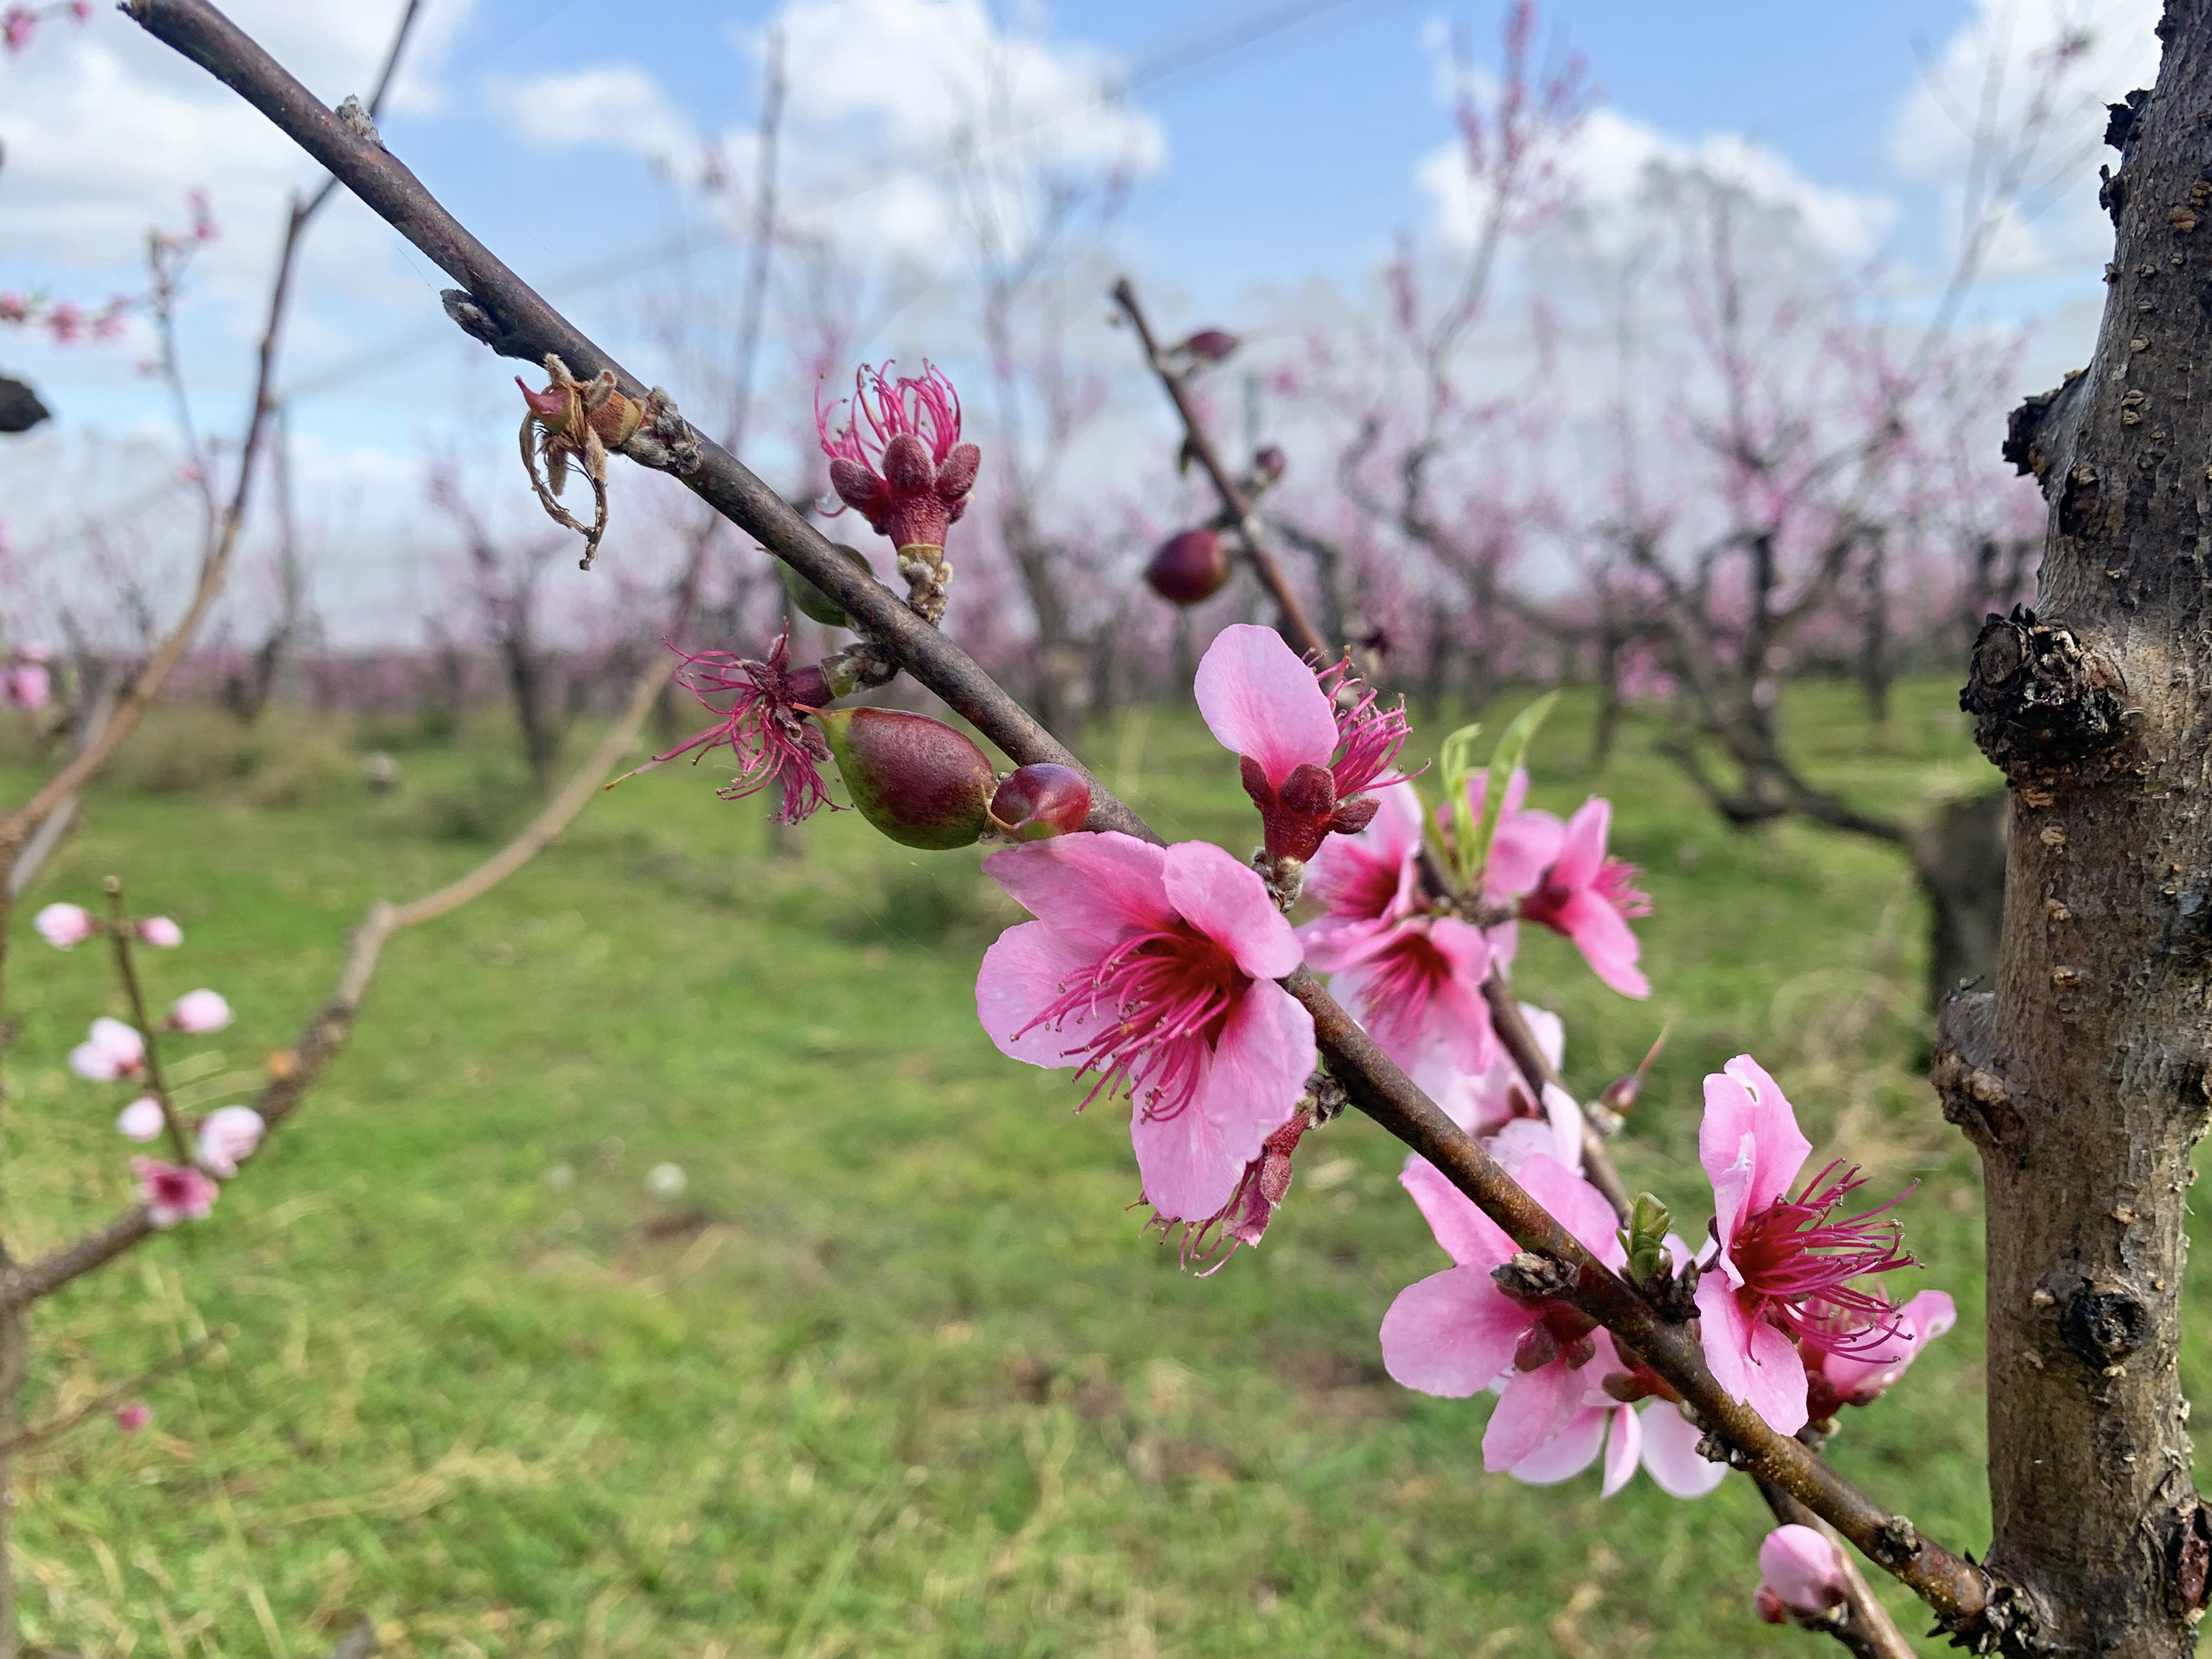 Three baby nectarines and pink flowers on a tree in an orchard.